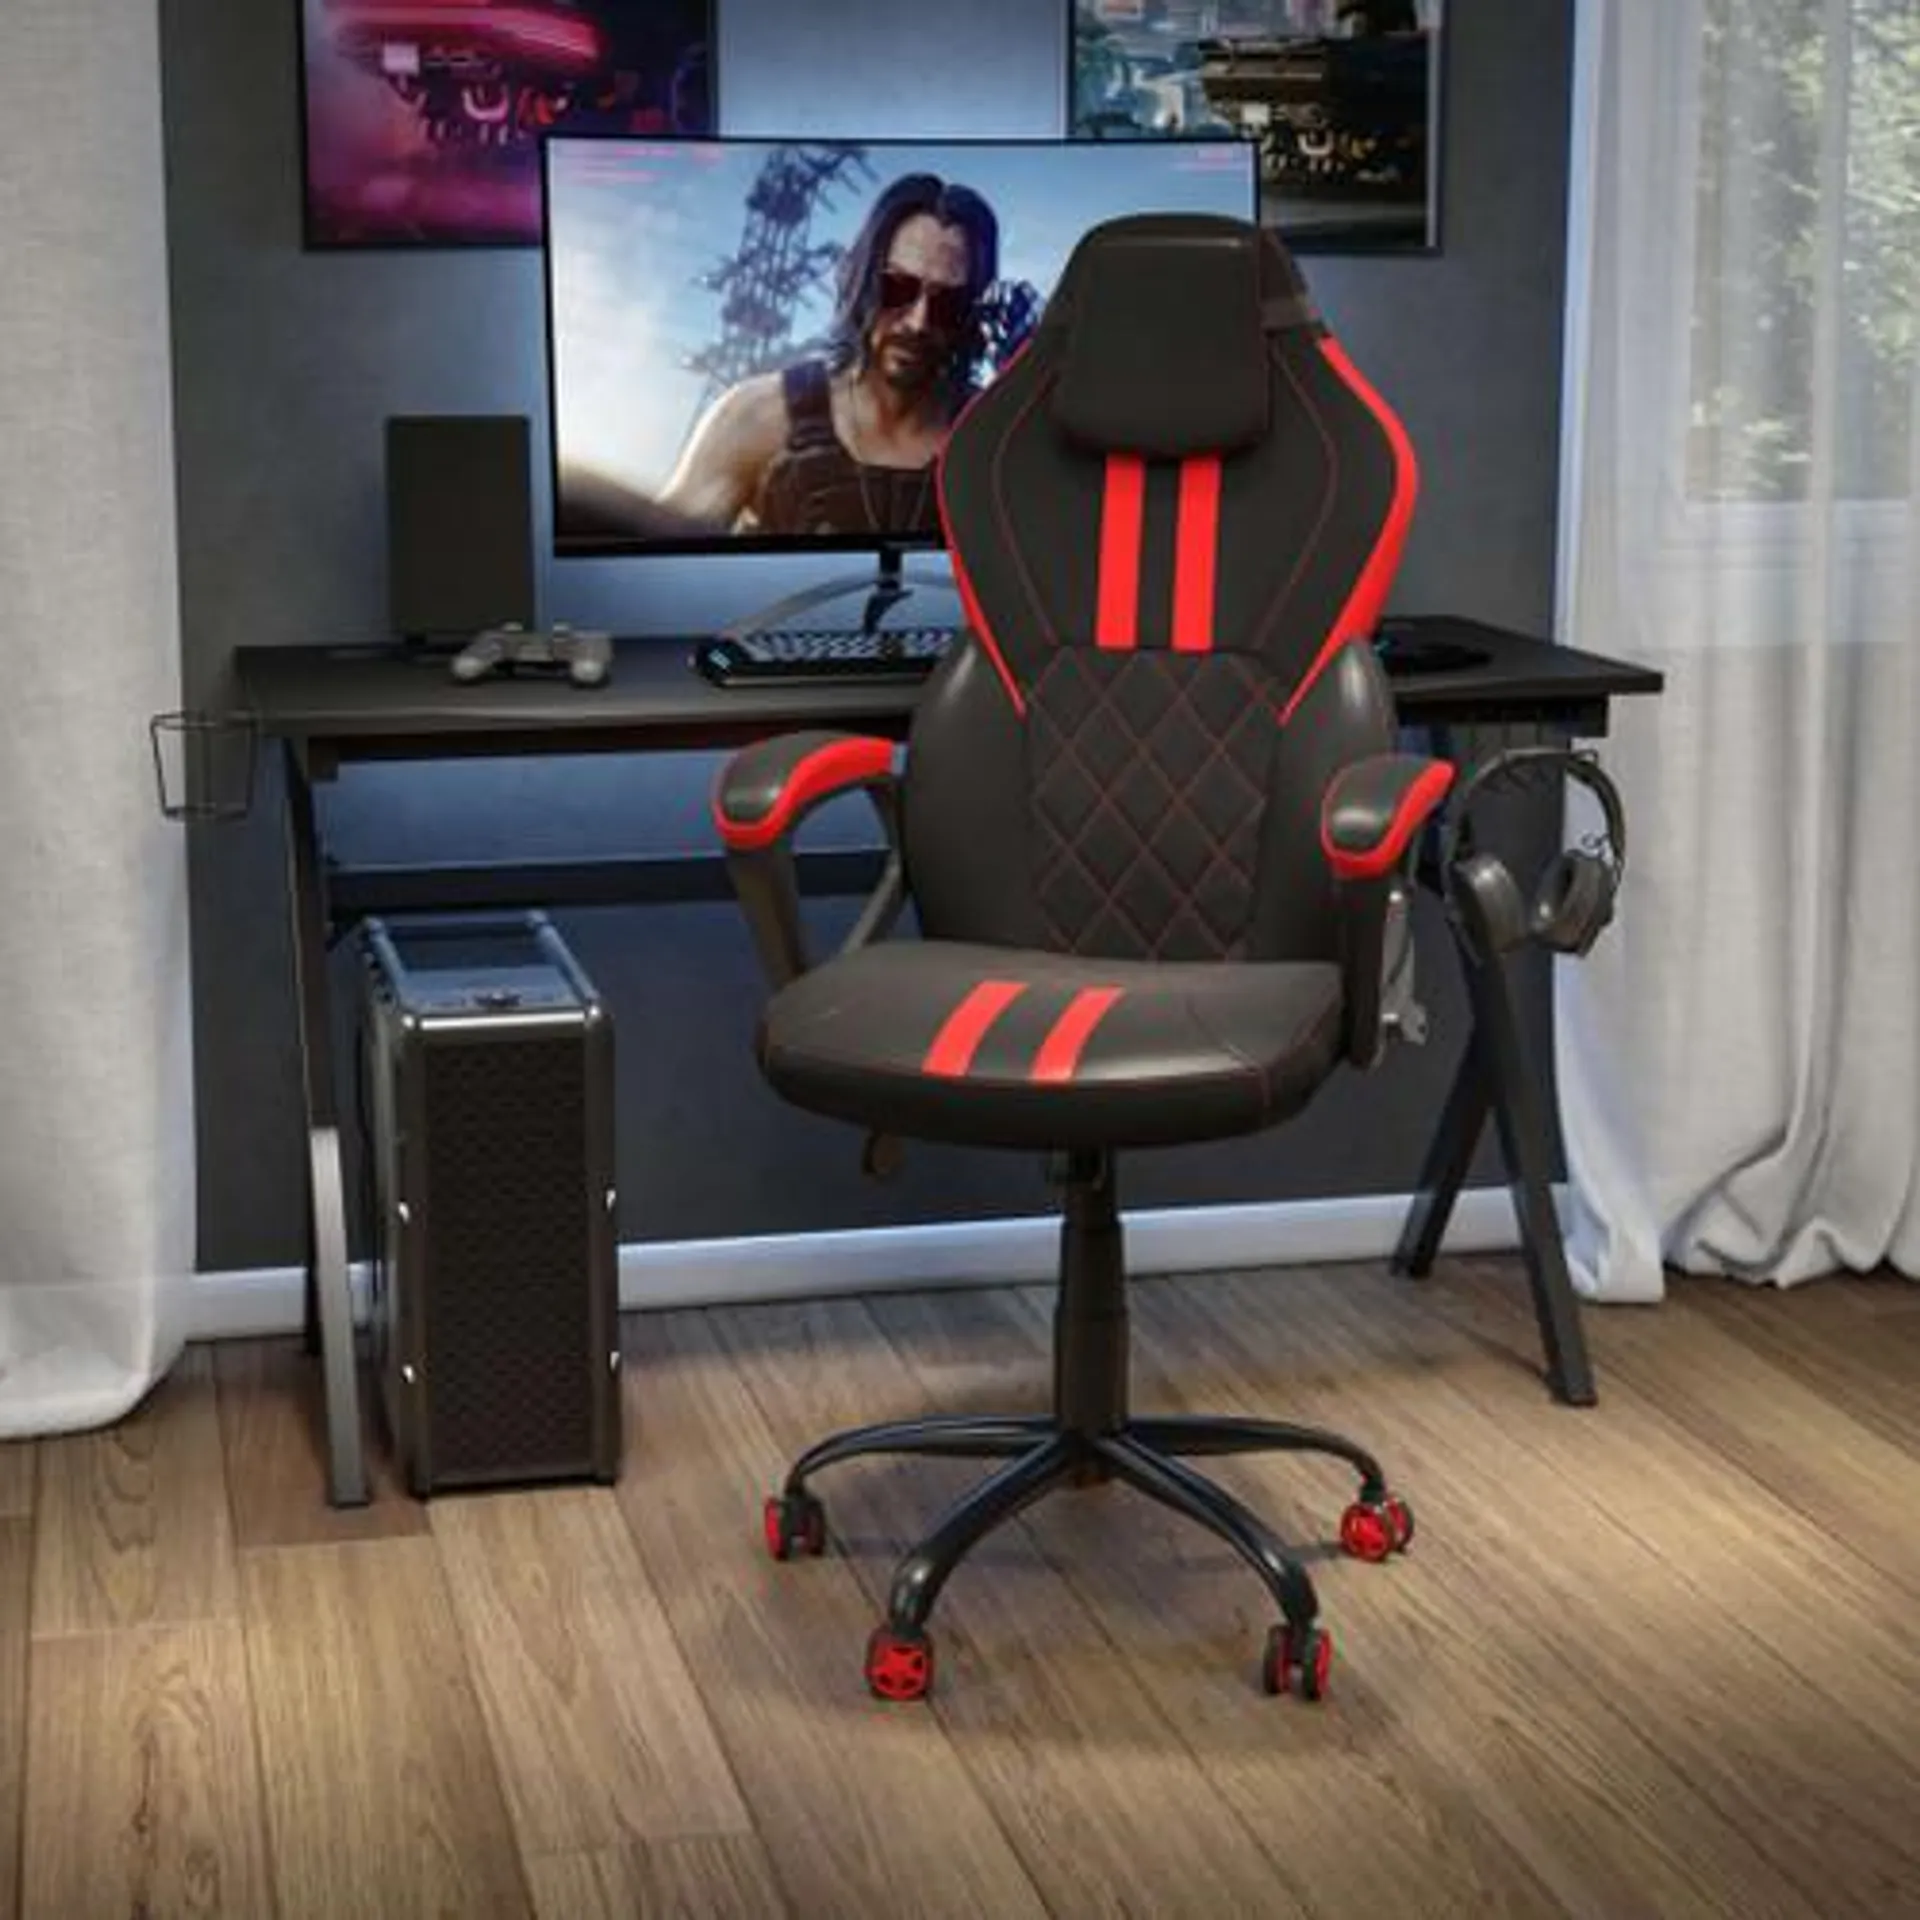 Ergonomic Office Computer Chair - Adjustable Black and Red Designer Gaming Chair - 360° Swivel - Red Dual Wheel Casters